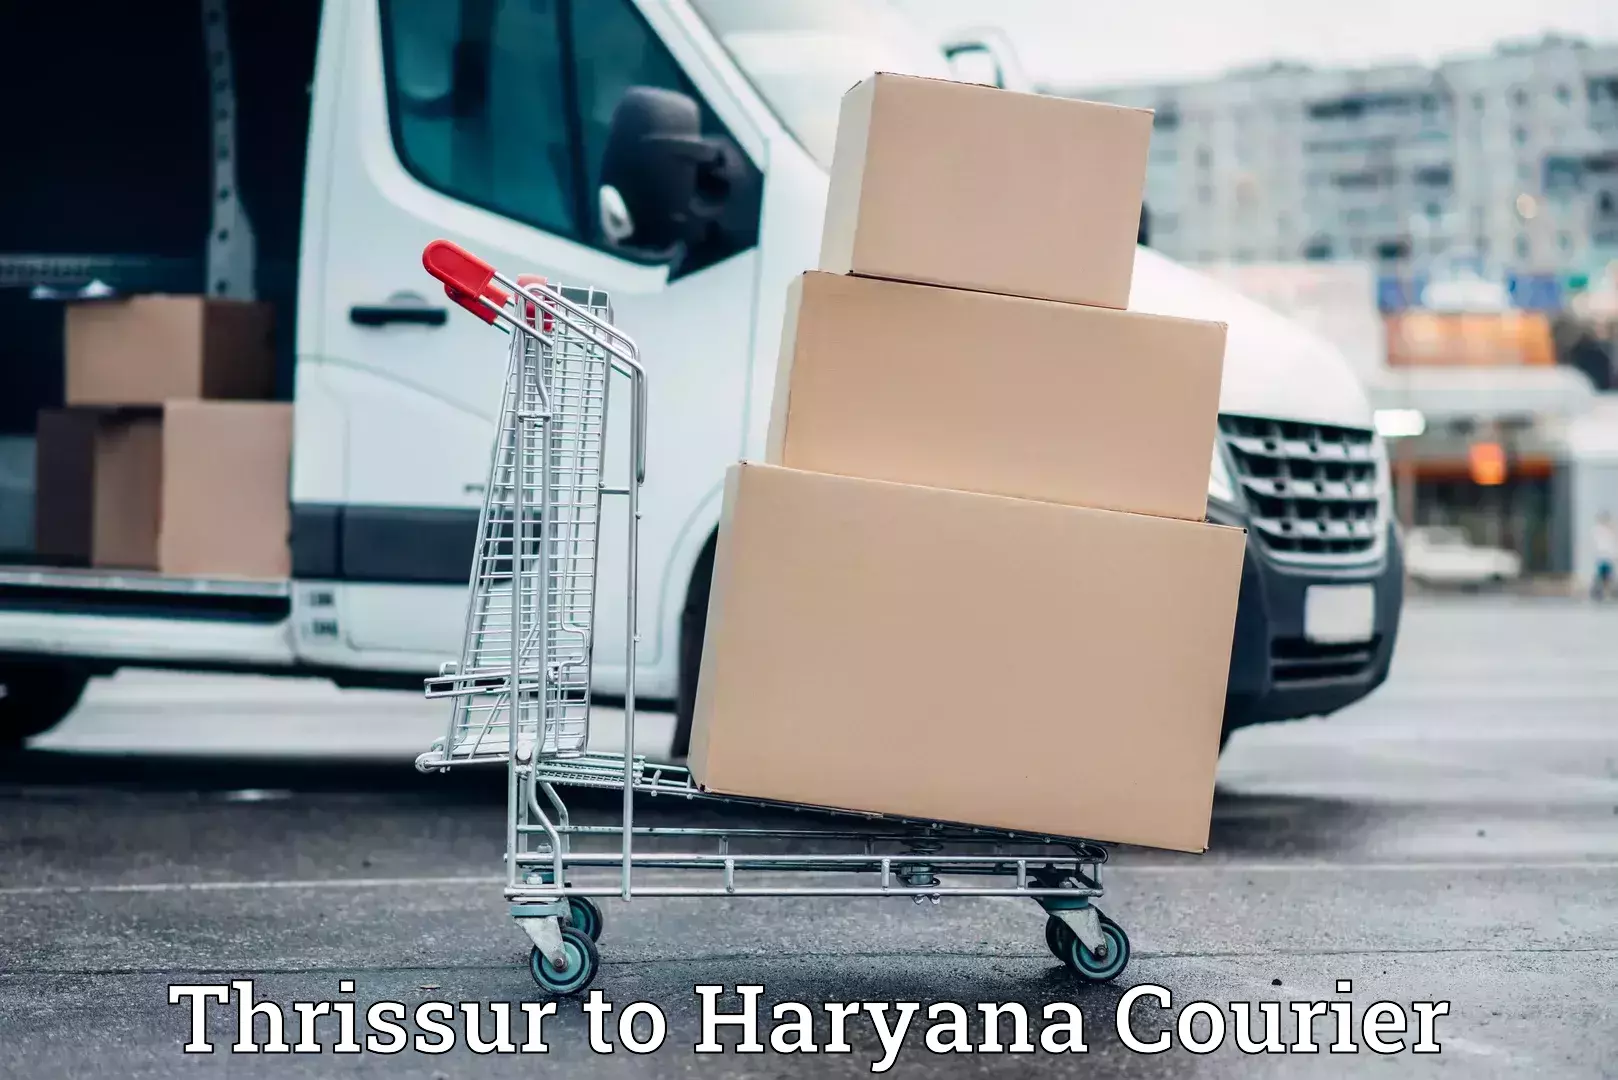 Household transport experts Thrissur to Haryana